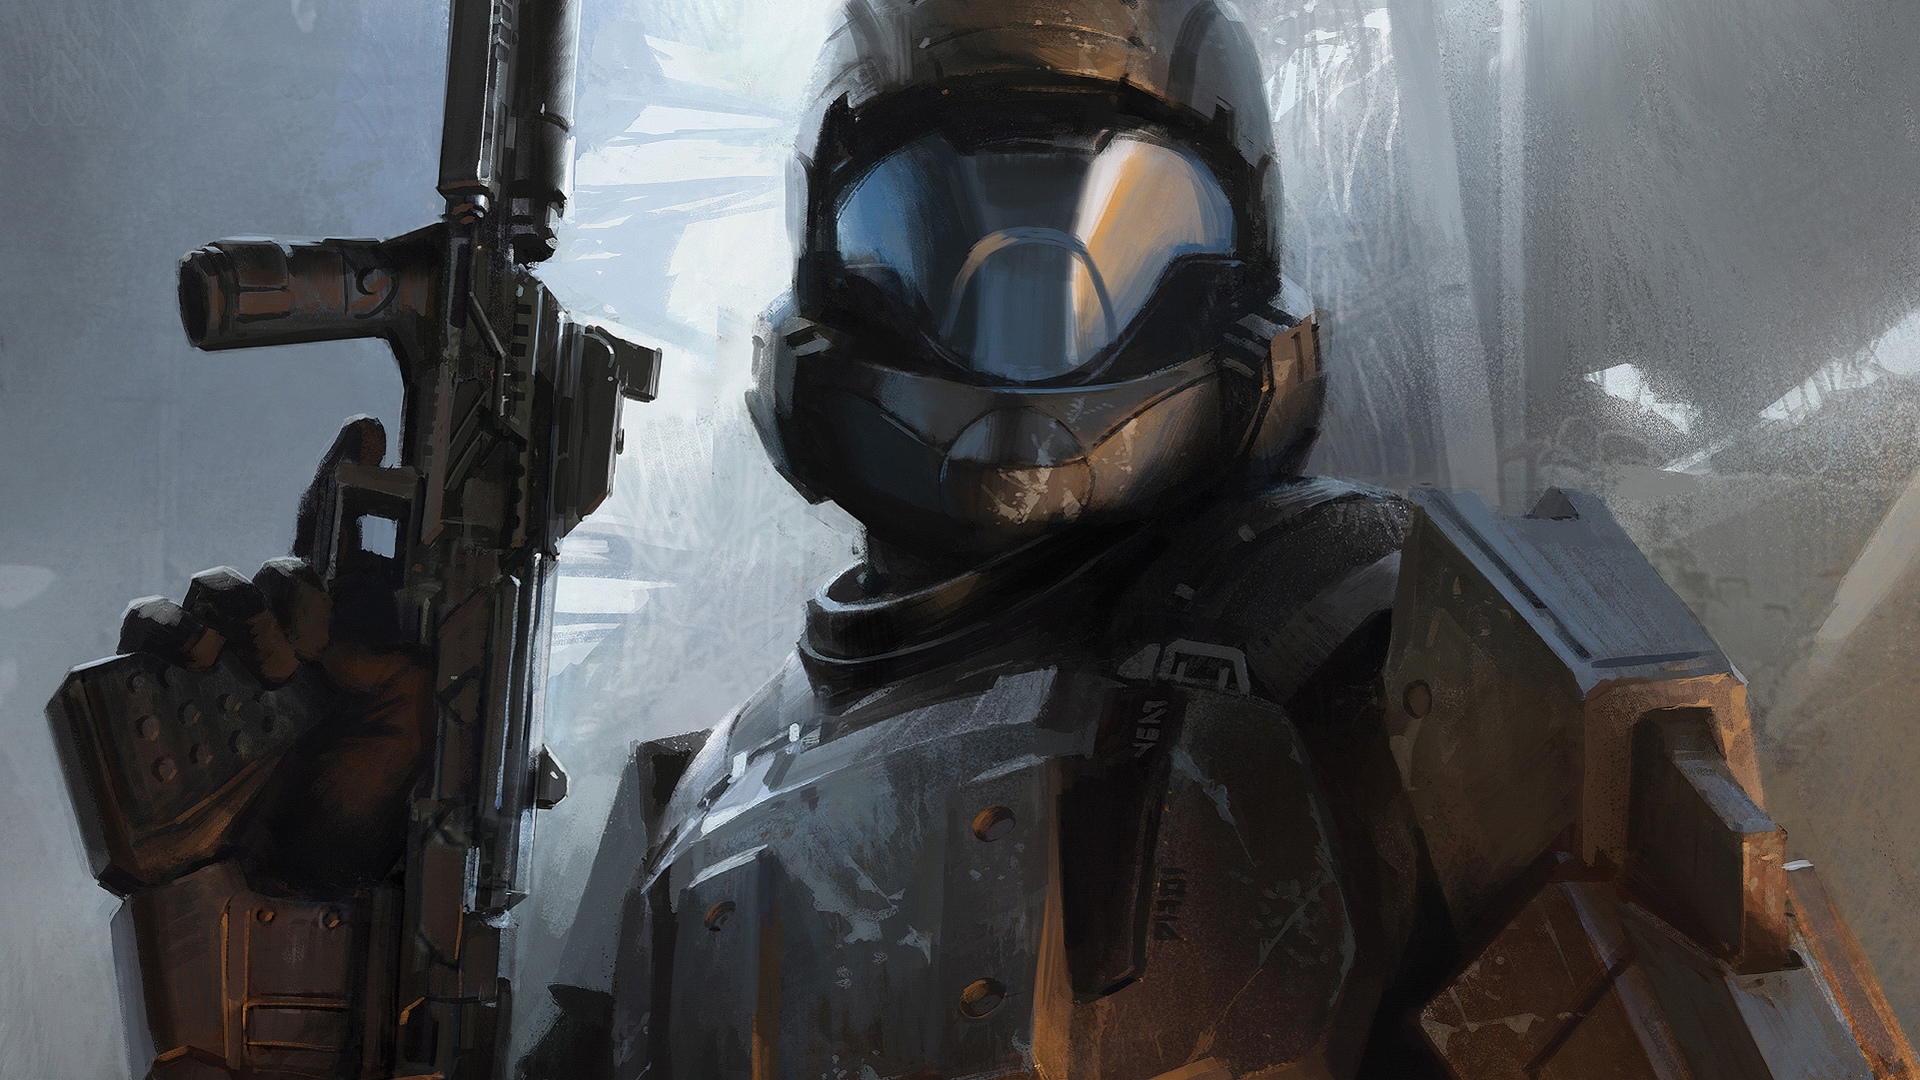 General 1920x1080 Halo 3: ODST video game art Halo (game) video game characters helmet video games gun armor